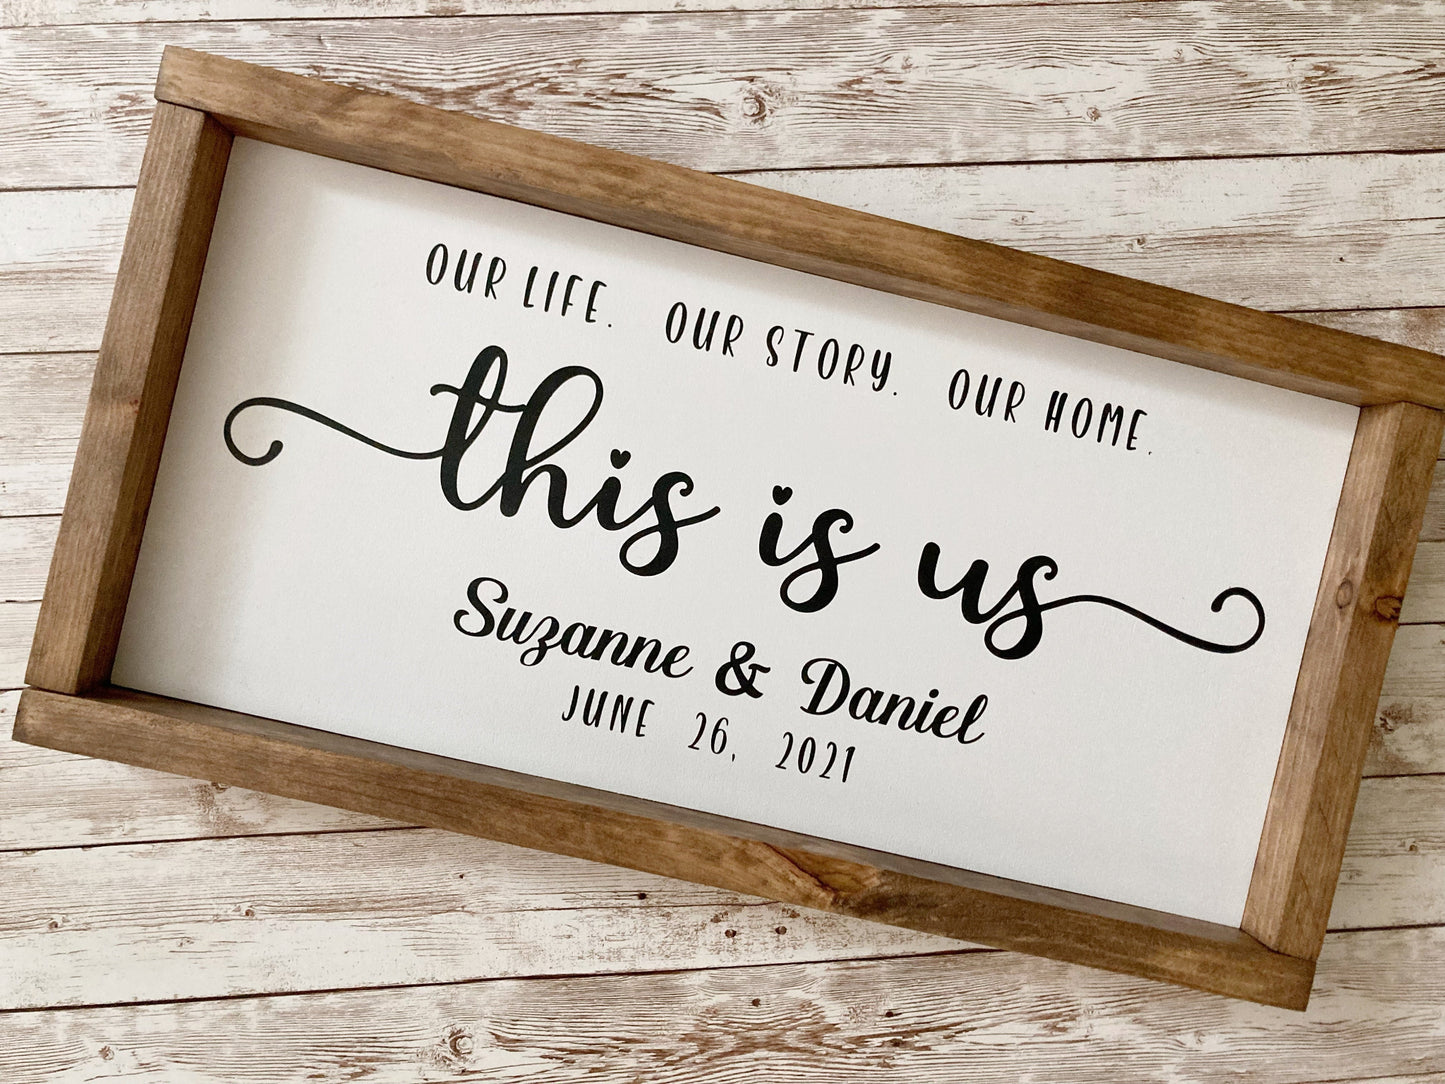 Personalized Wedding or Anniversary Wood Sign